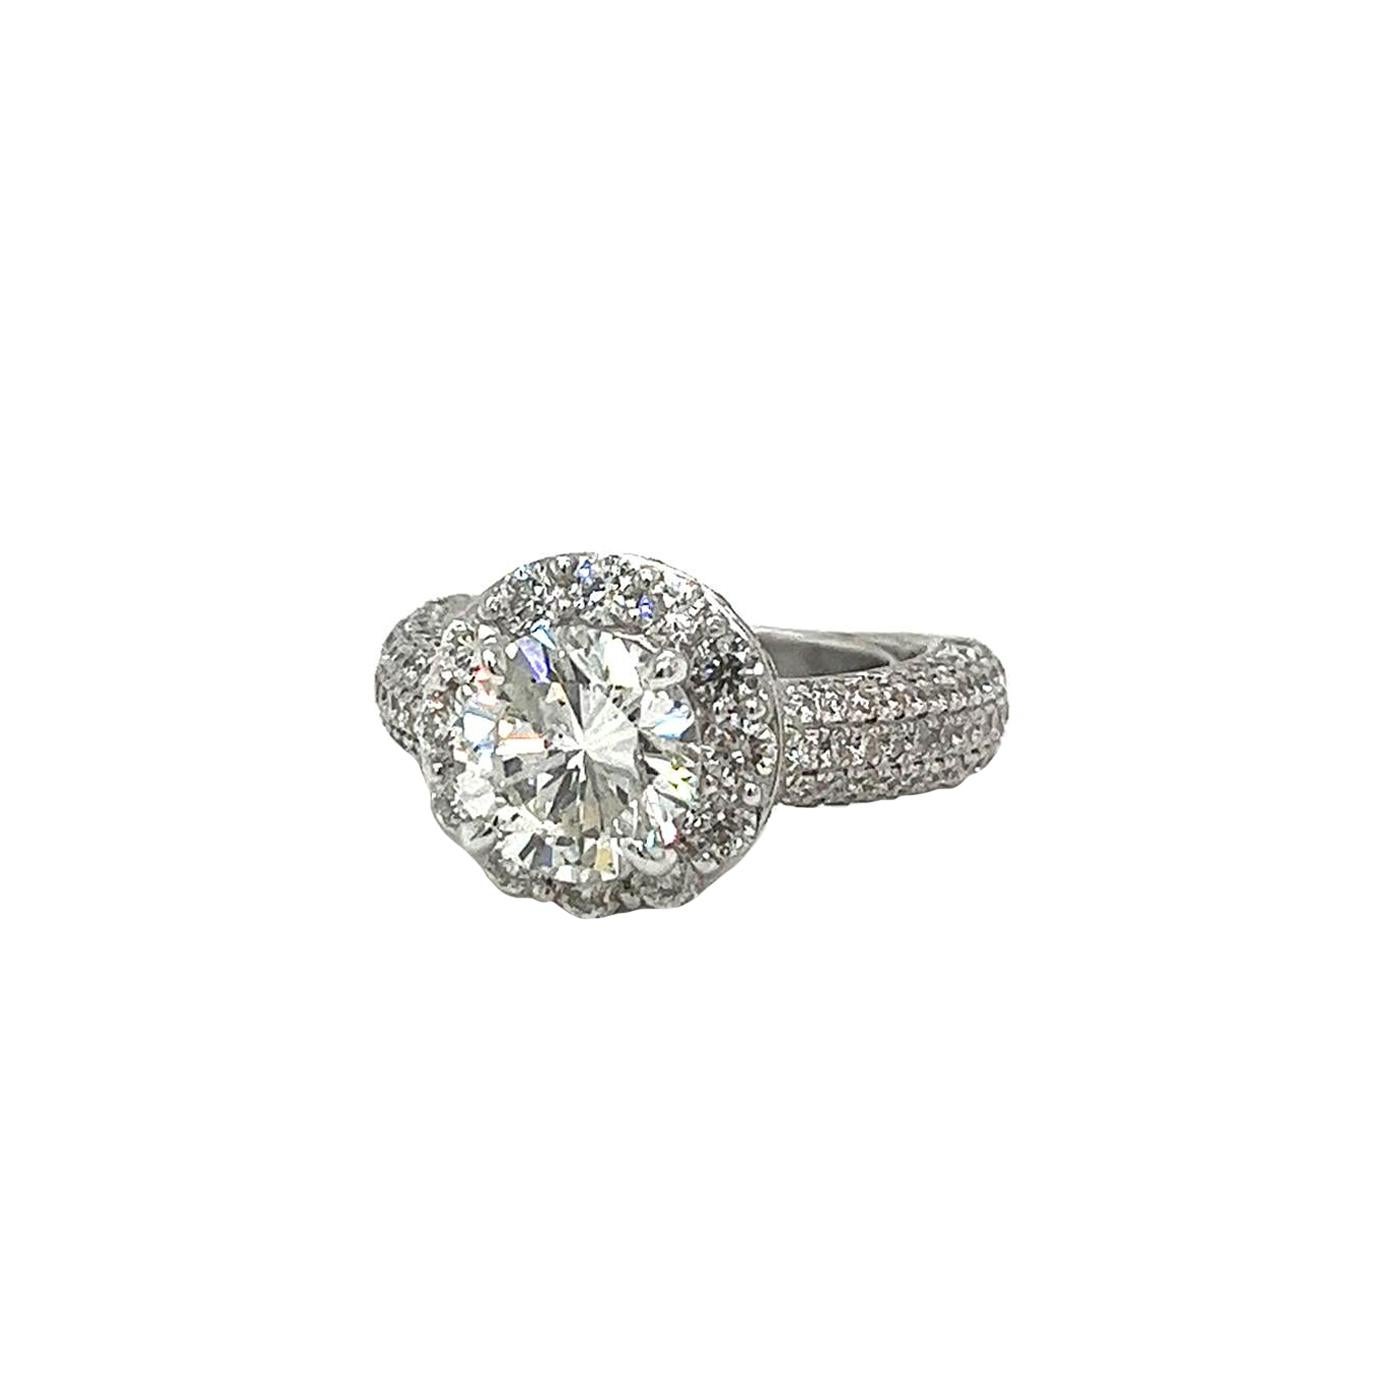 2.56ct Natural Round Shape Diamond Ring with Pave Diamonds 18K White Gold In Good Condition For Sale In Aventura, FL